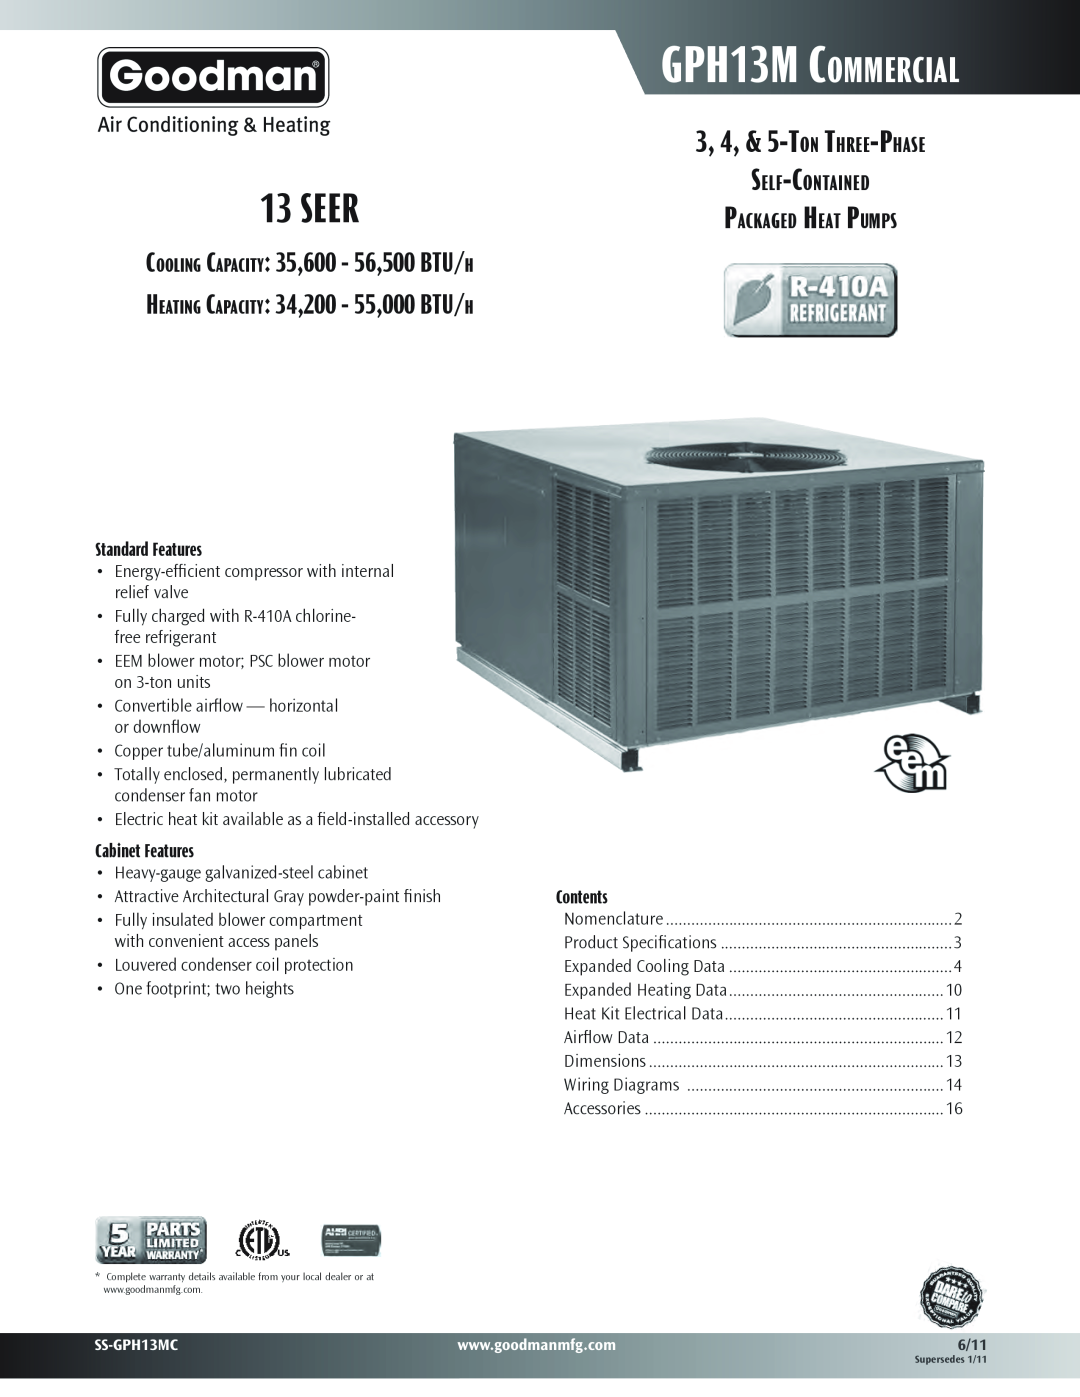 Goodman Mfg SS-GPH13MC warranty 3, 4, & 5-Ton Three-Phase, Self-Contained Packaged Heat Pumps, Seer, GPH13M Commercial 